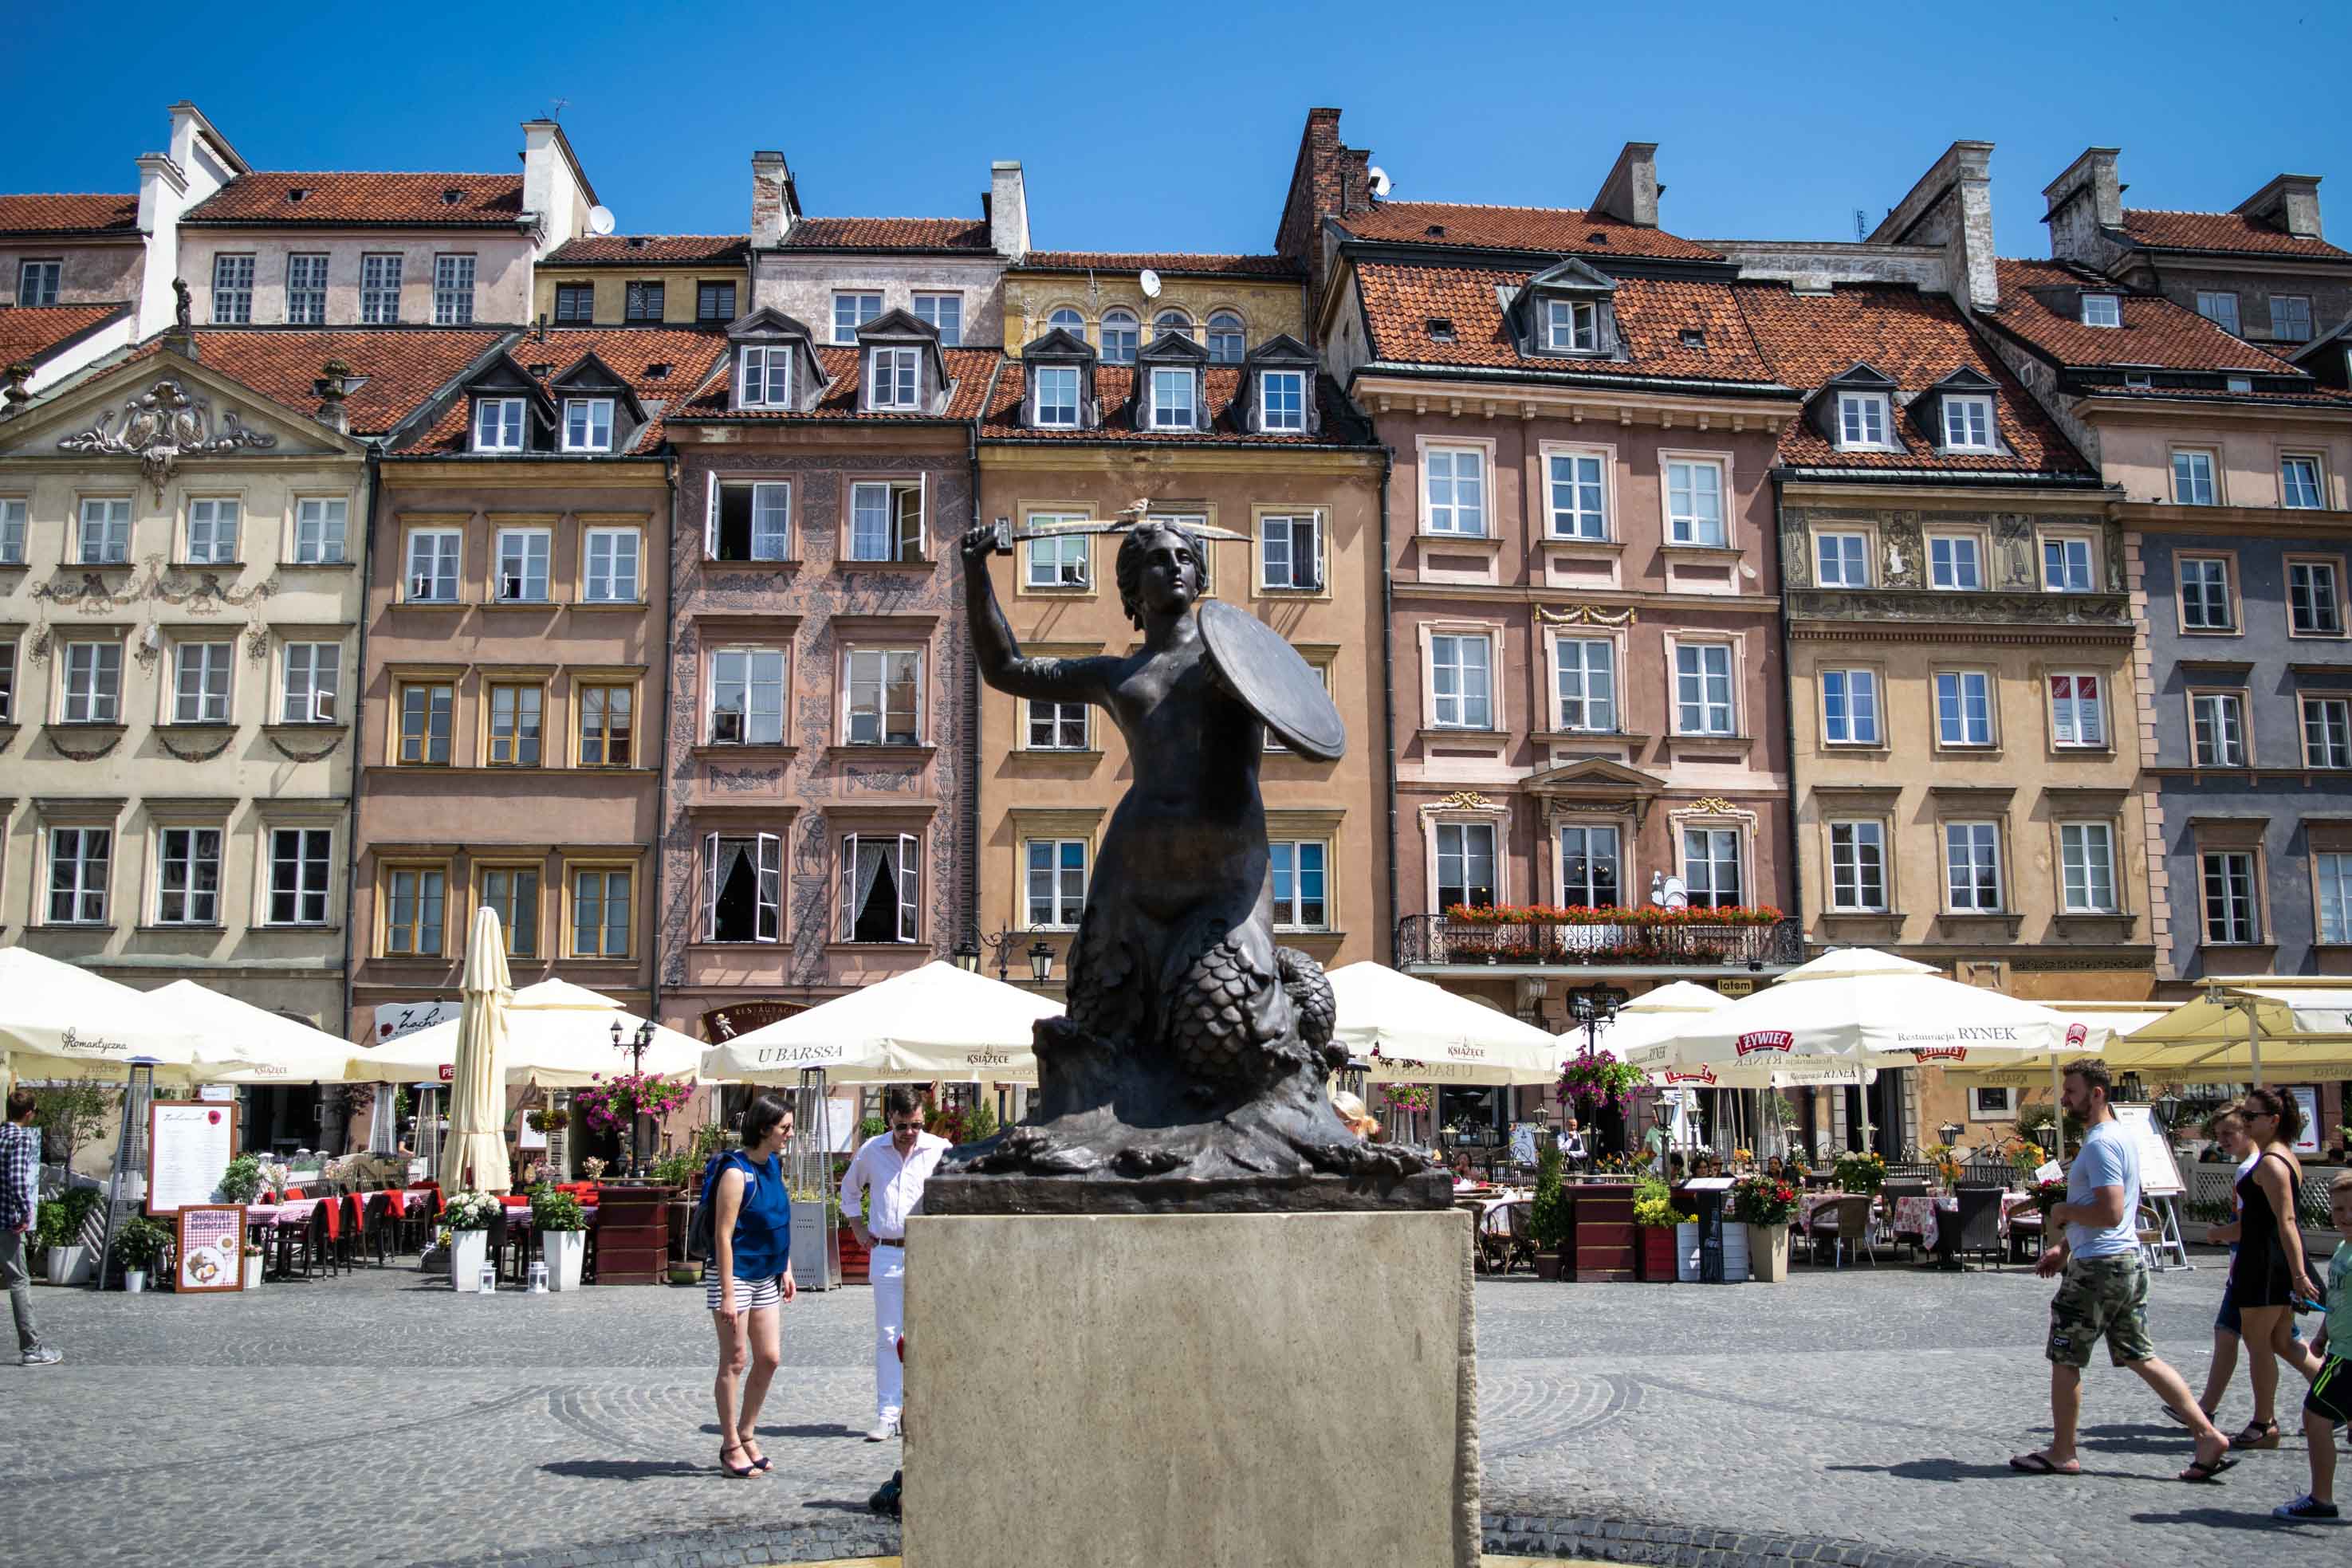 Warsaw is to receive Europe’s largest network of air-quality sensors led by the Warsaw university and Firm